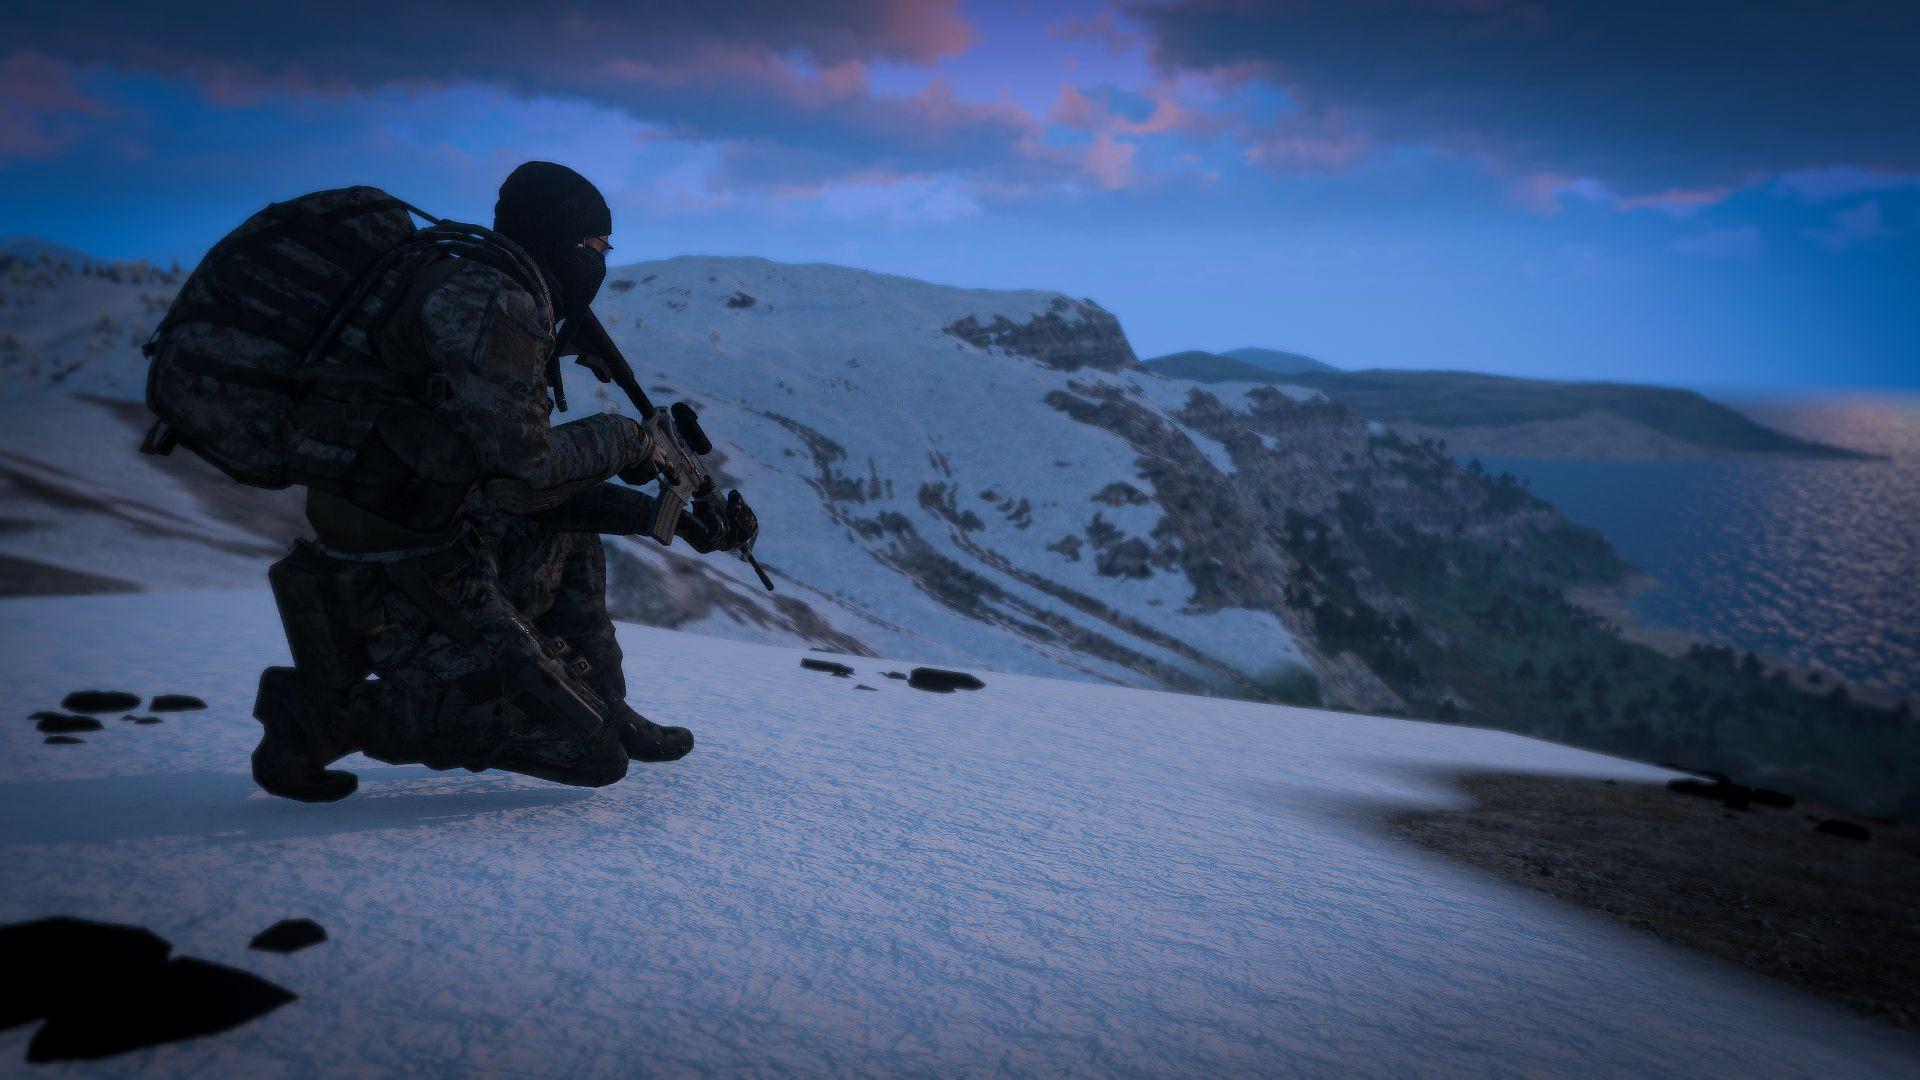 365126 Arma 3 Contact 4k - Rare Gallery HD Wallpapers